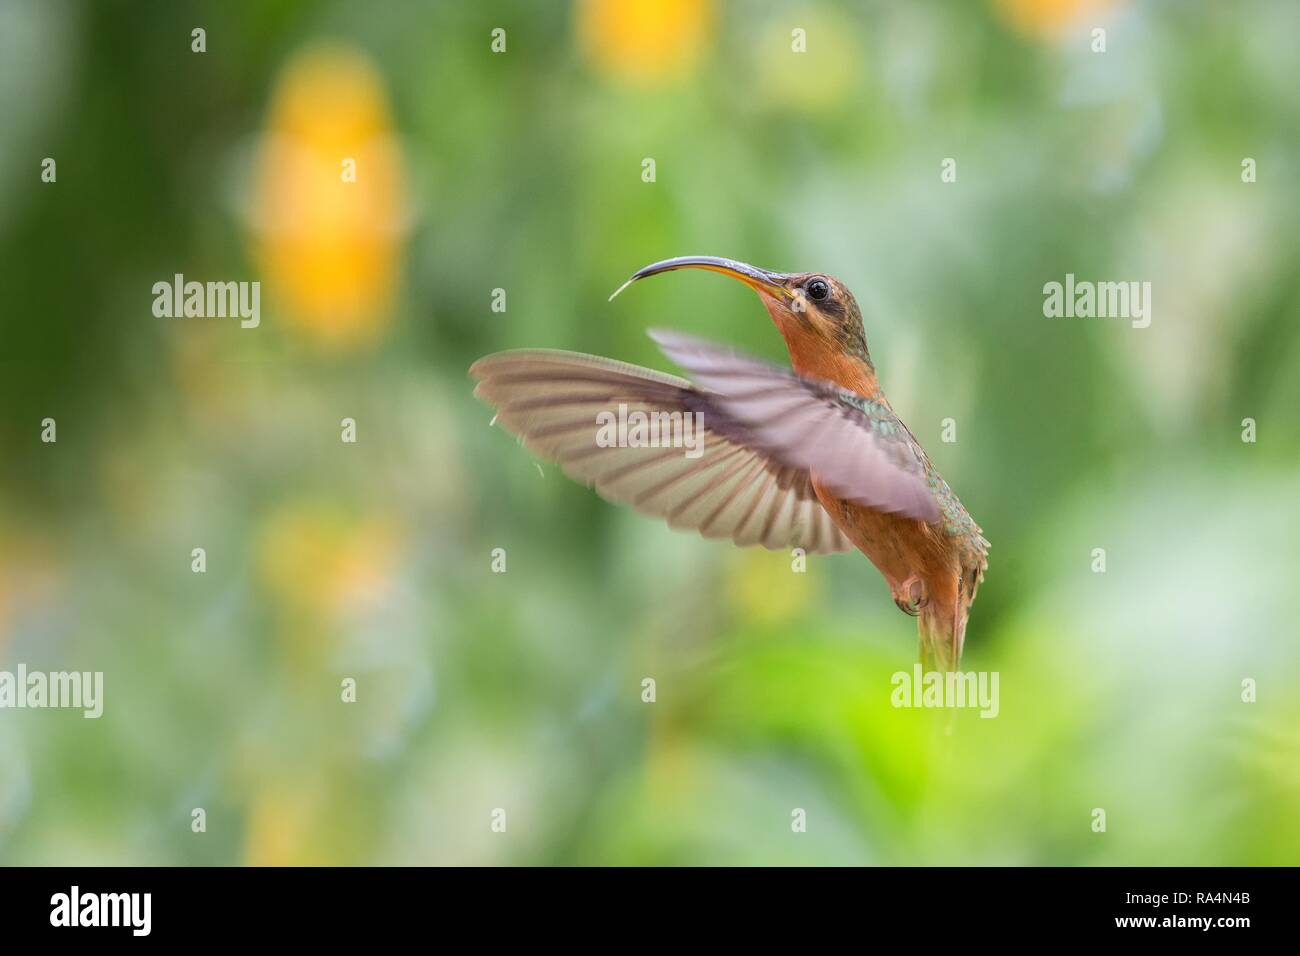 Rufous-breasted hermit (Glaucis hirsutus) hovering in the air, caribean tropical forest, Trinidad and Tobago, bird on colorful clear background,beauti Stock Photo